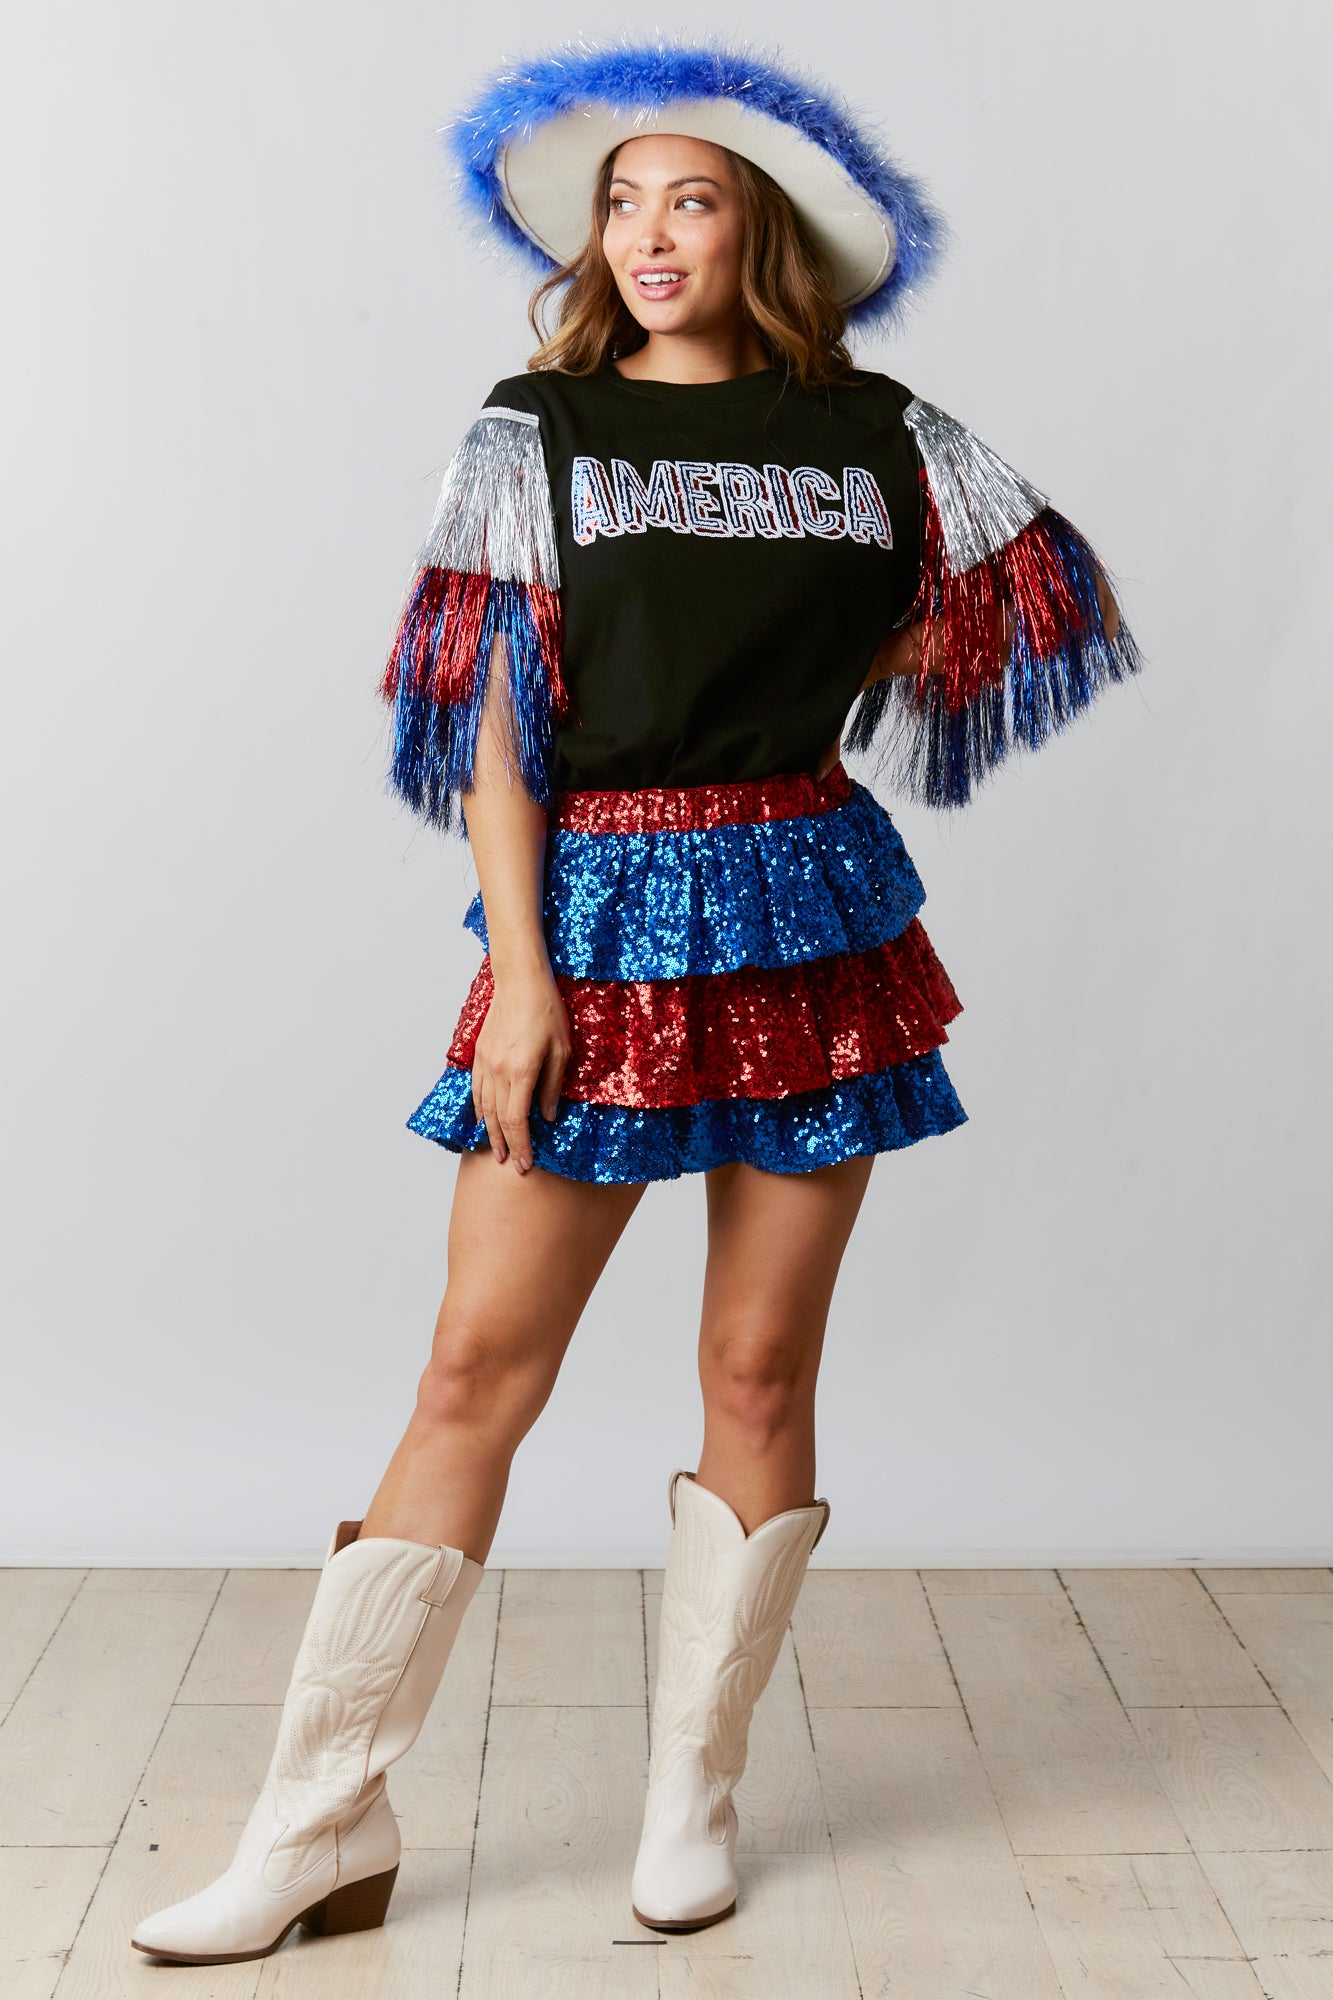 Red White and Blue Sequin Tiered Skort Skirt